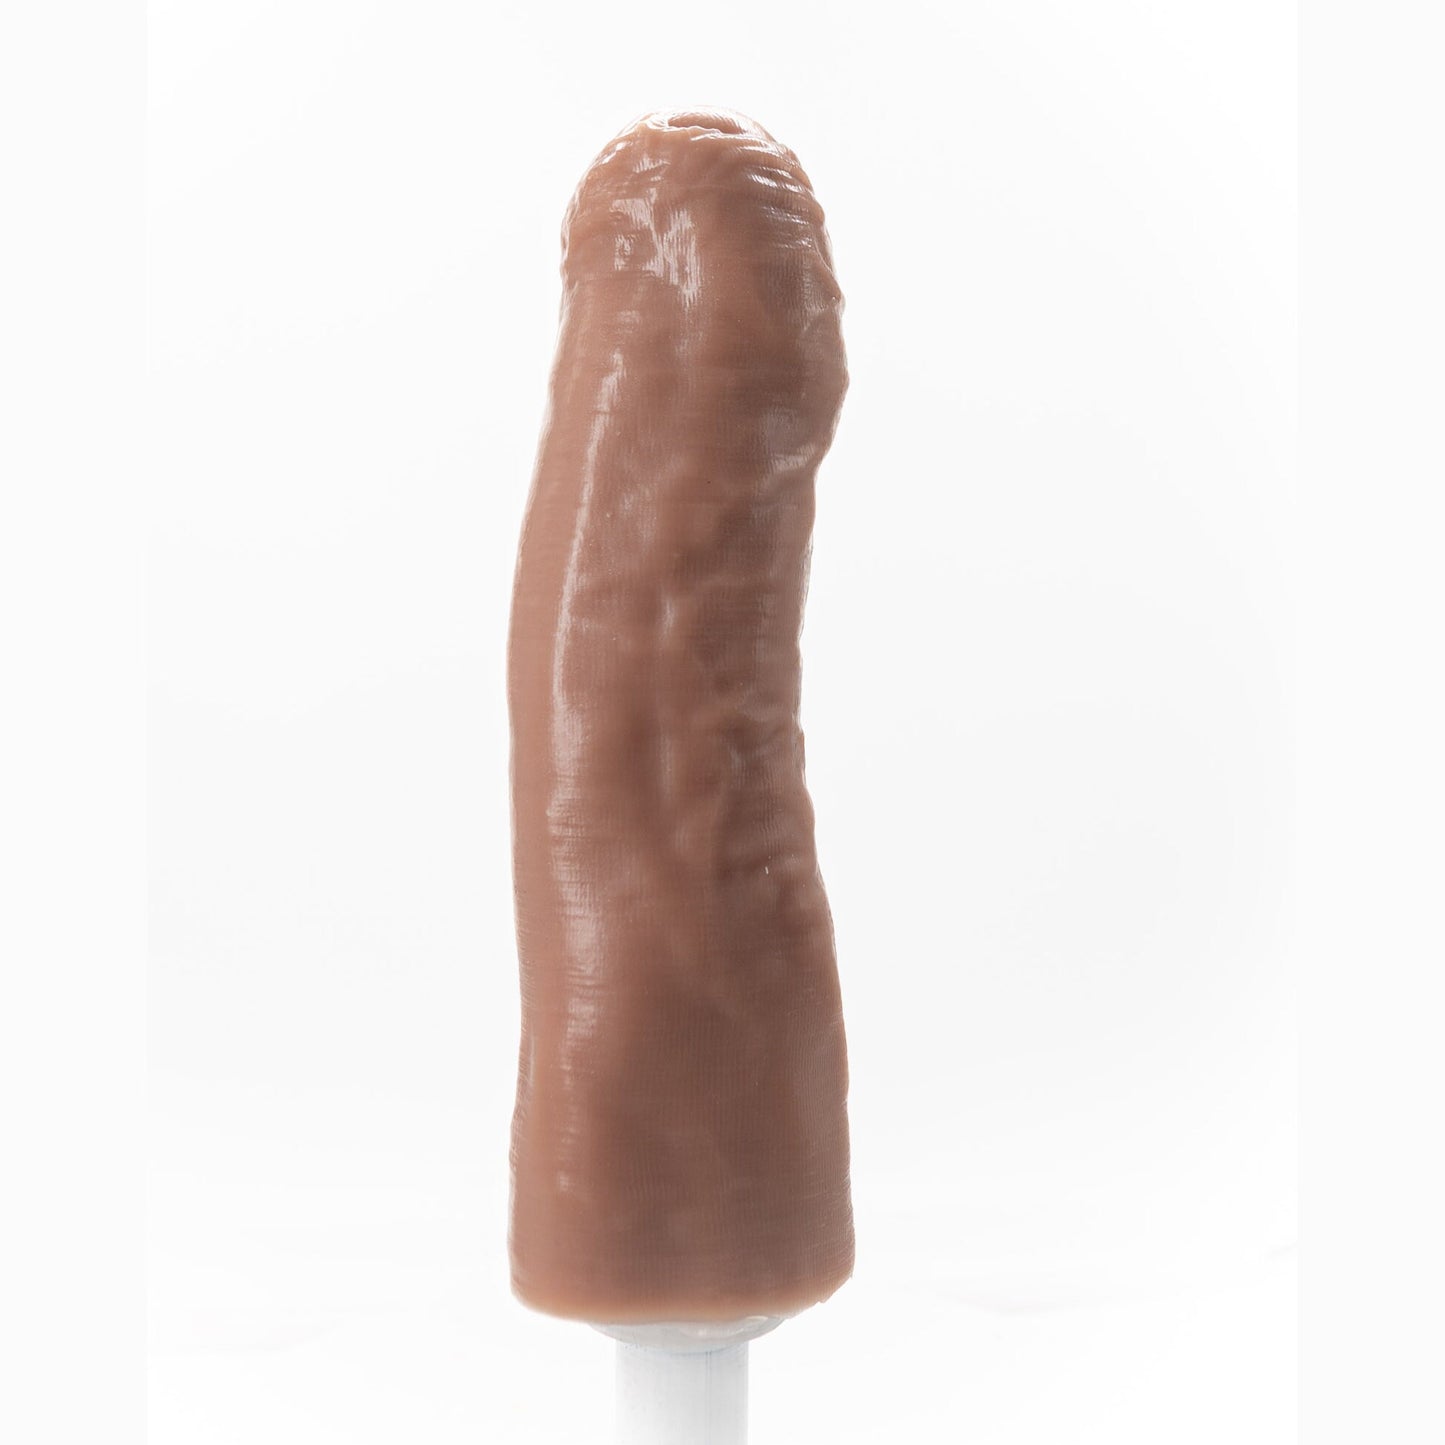 7.5 inch realistic penis sleeve/strap on - modeled after a real guy